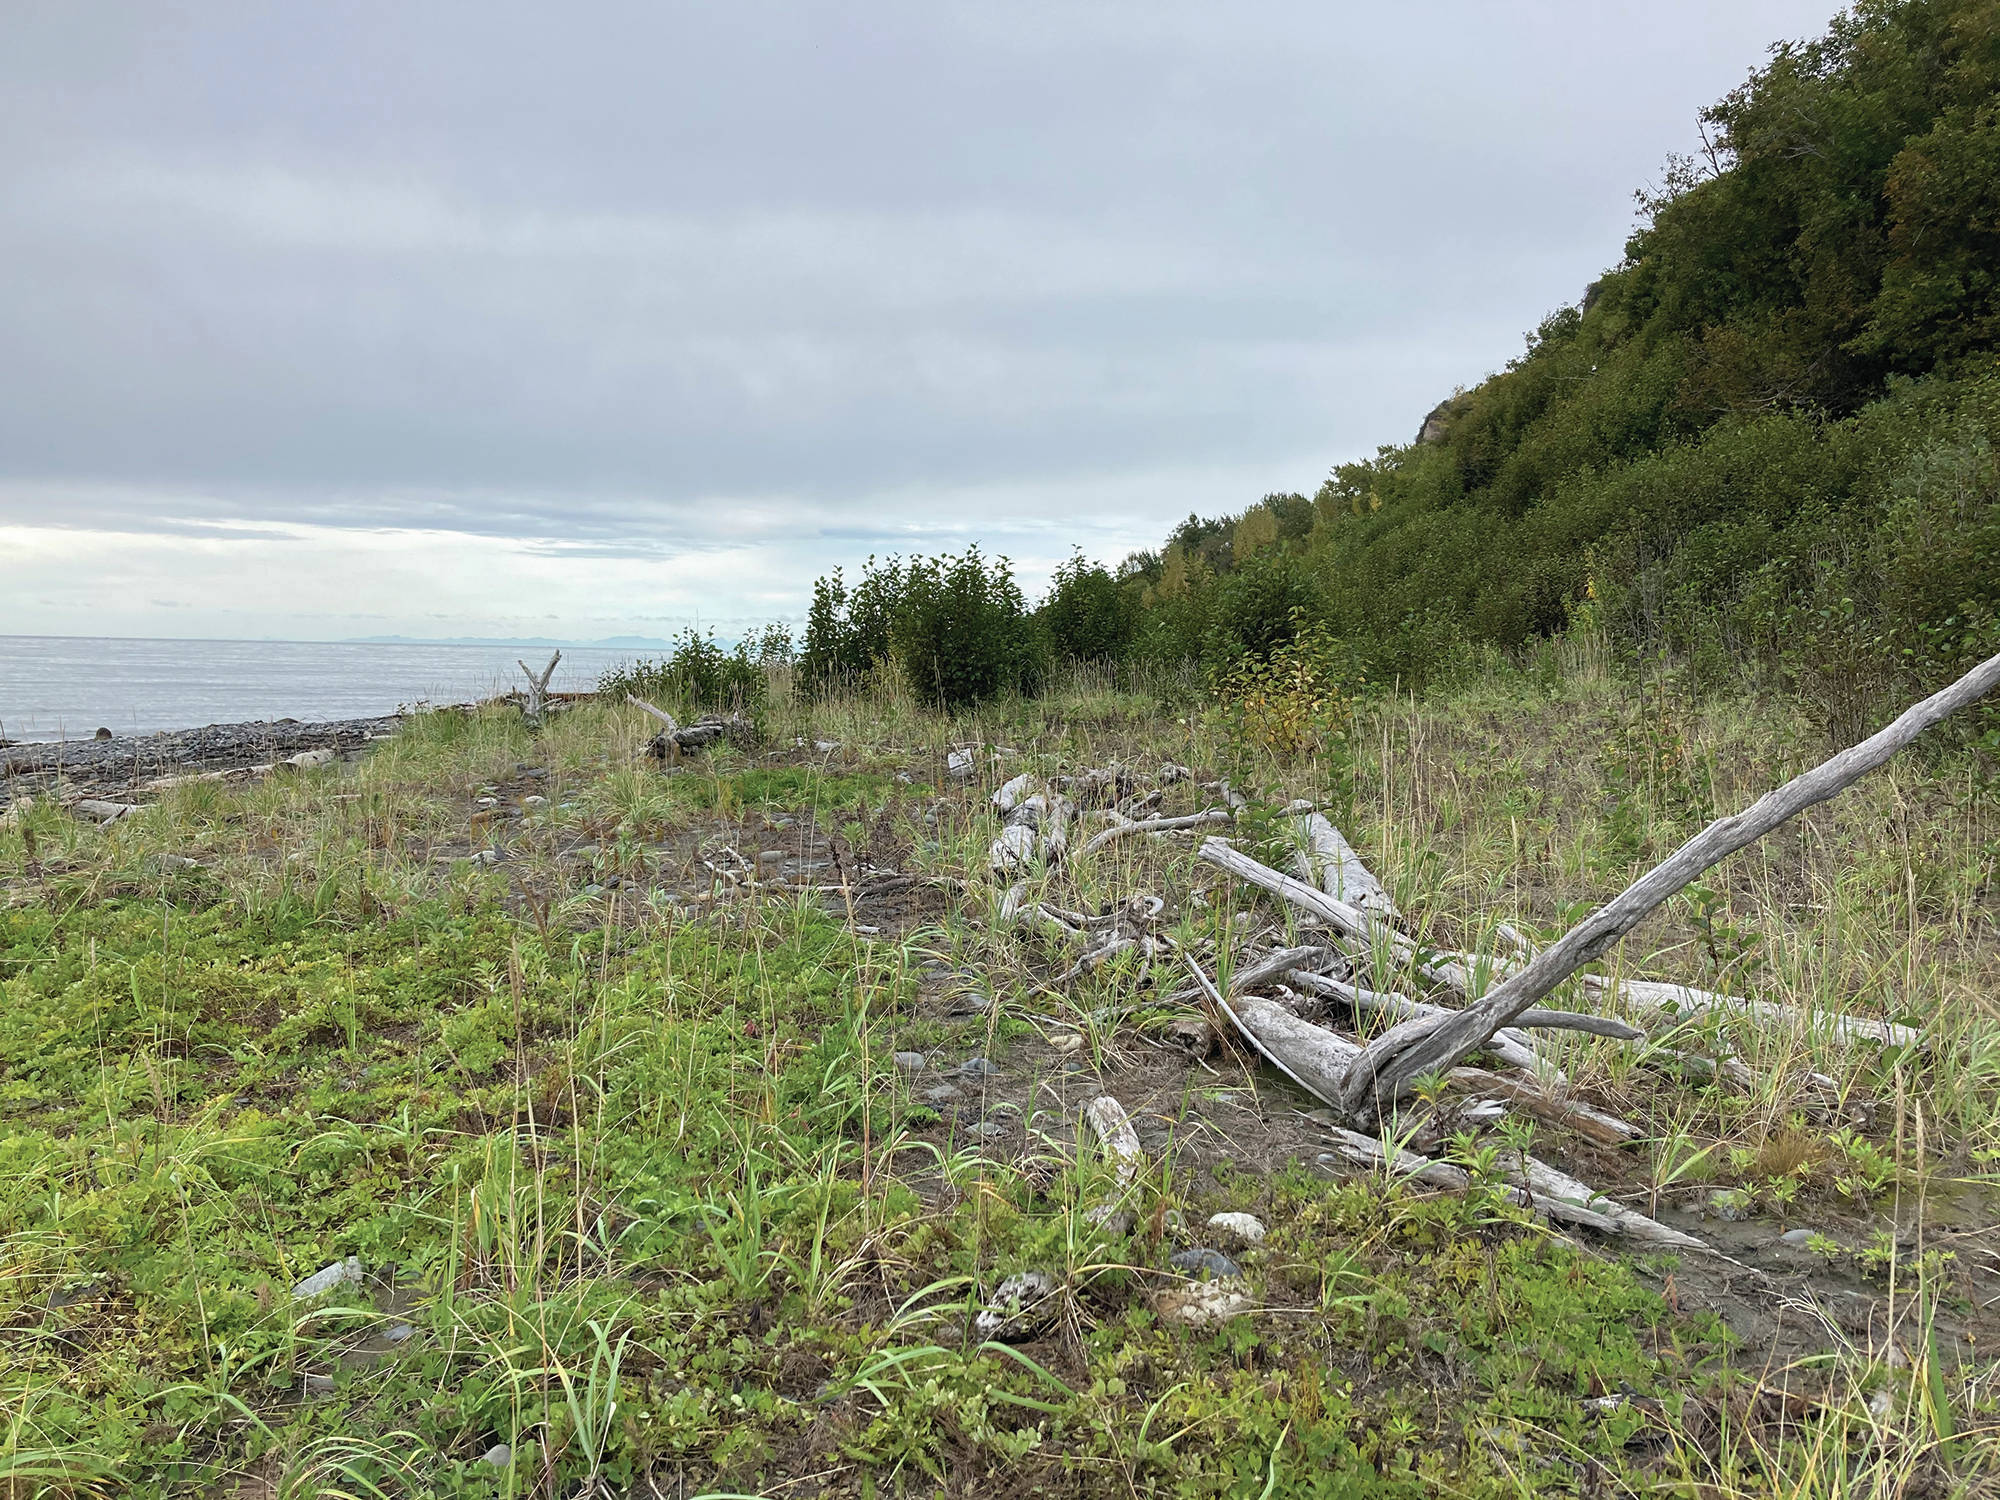 A section of the Diamond Creek beach has built up, with plants growing where 10 years ago there had been bare mud, as seen here on Sunday, Oct. 4, 2020, near Homer, Alaska. (Photo by Michael Armstrong/Homer News)